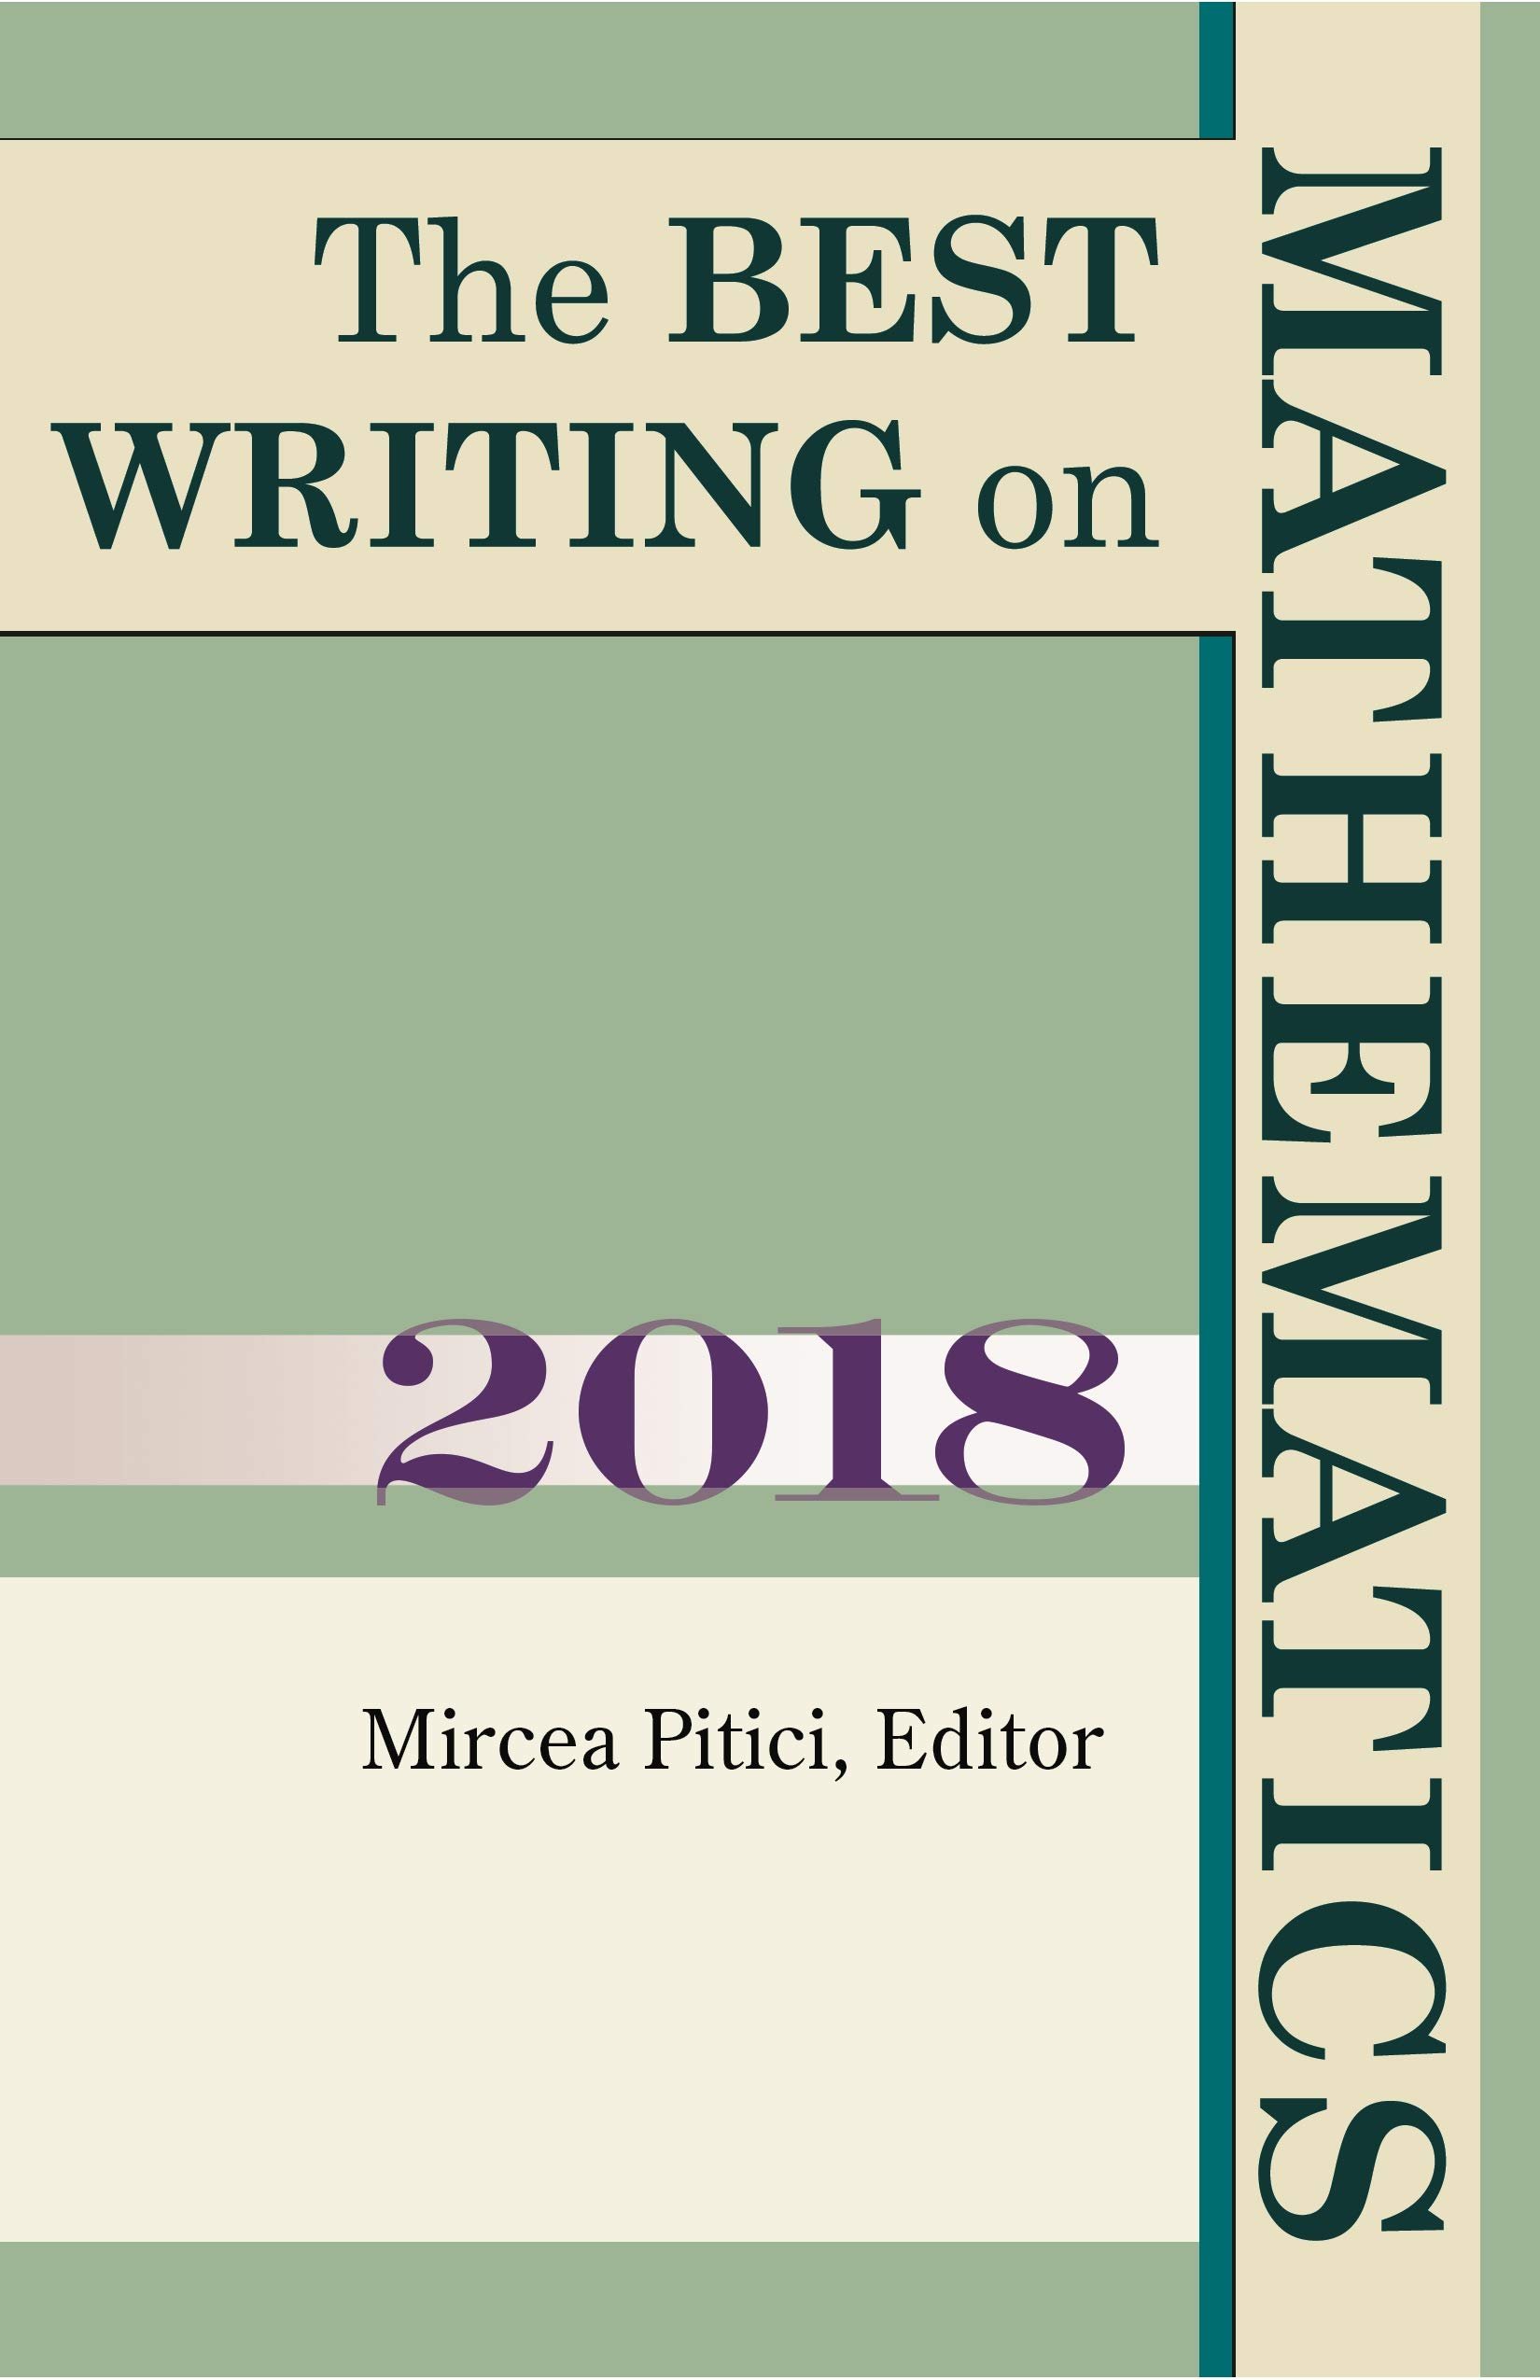 Download The Best Writing on Mathematics 2018 - SoftArchive